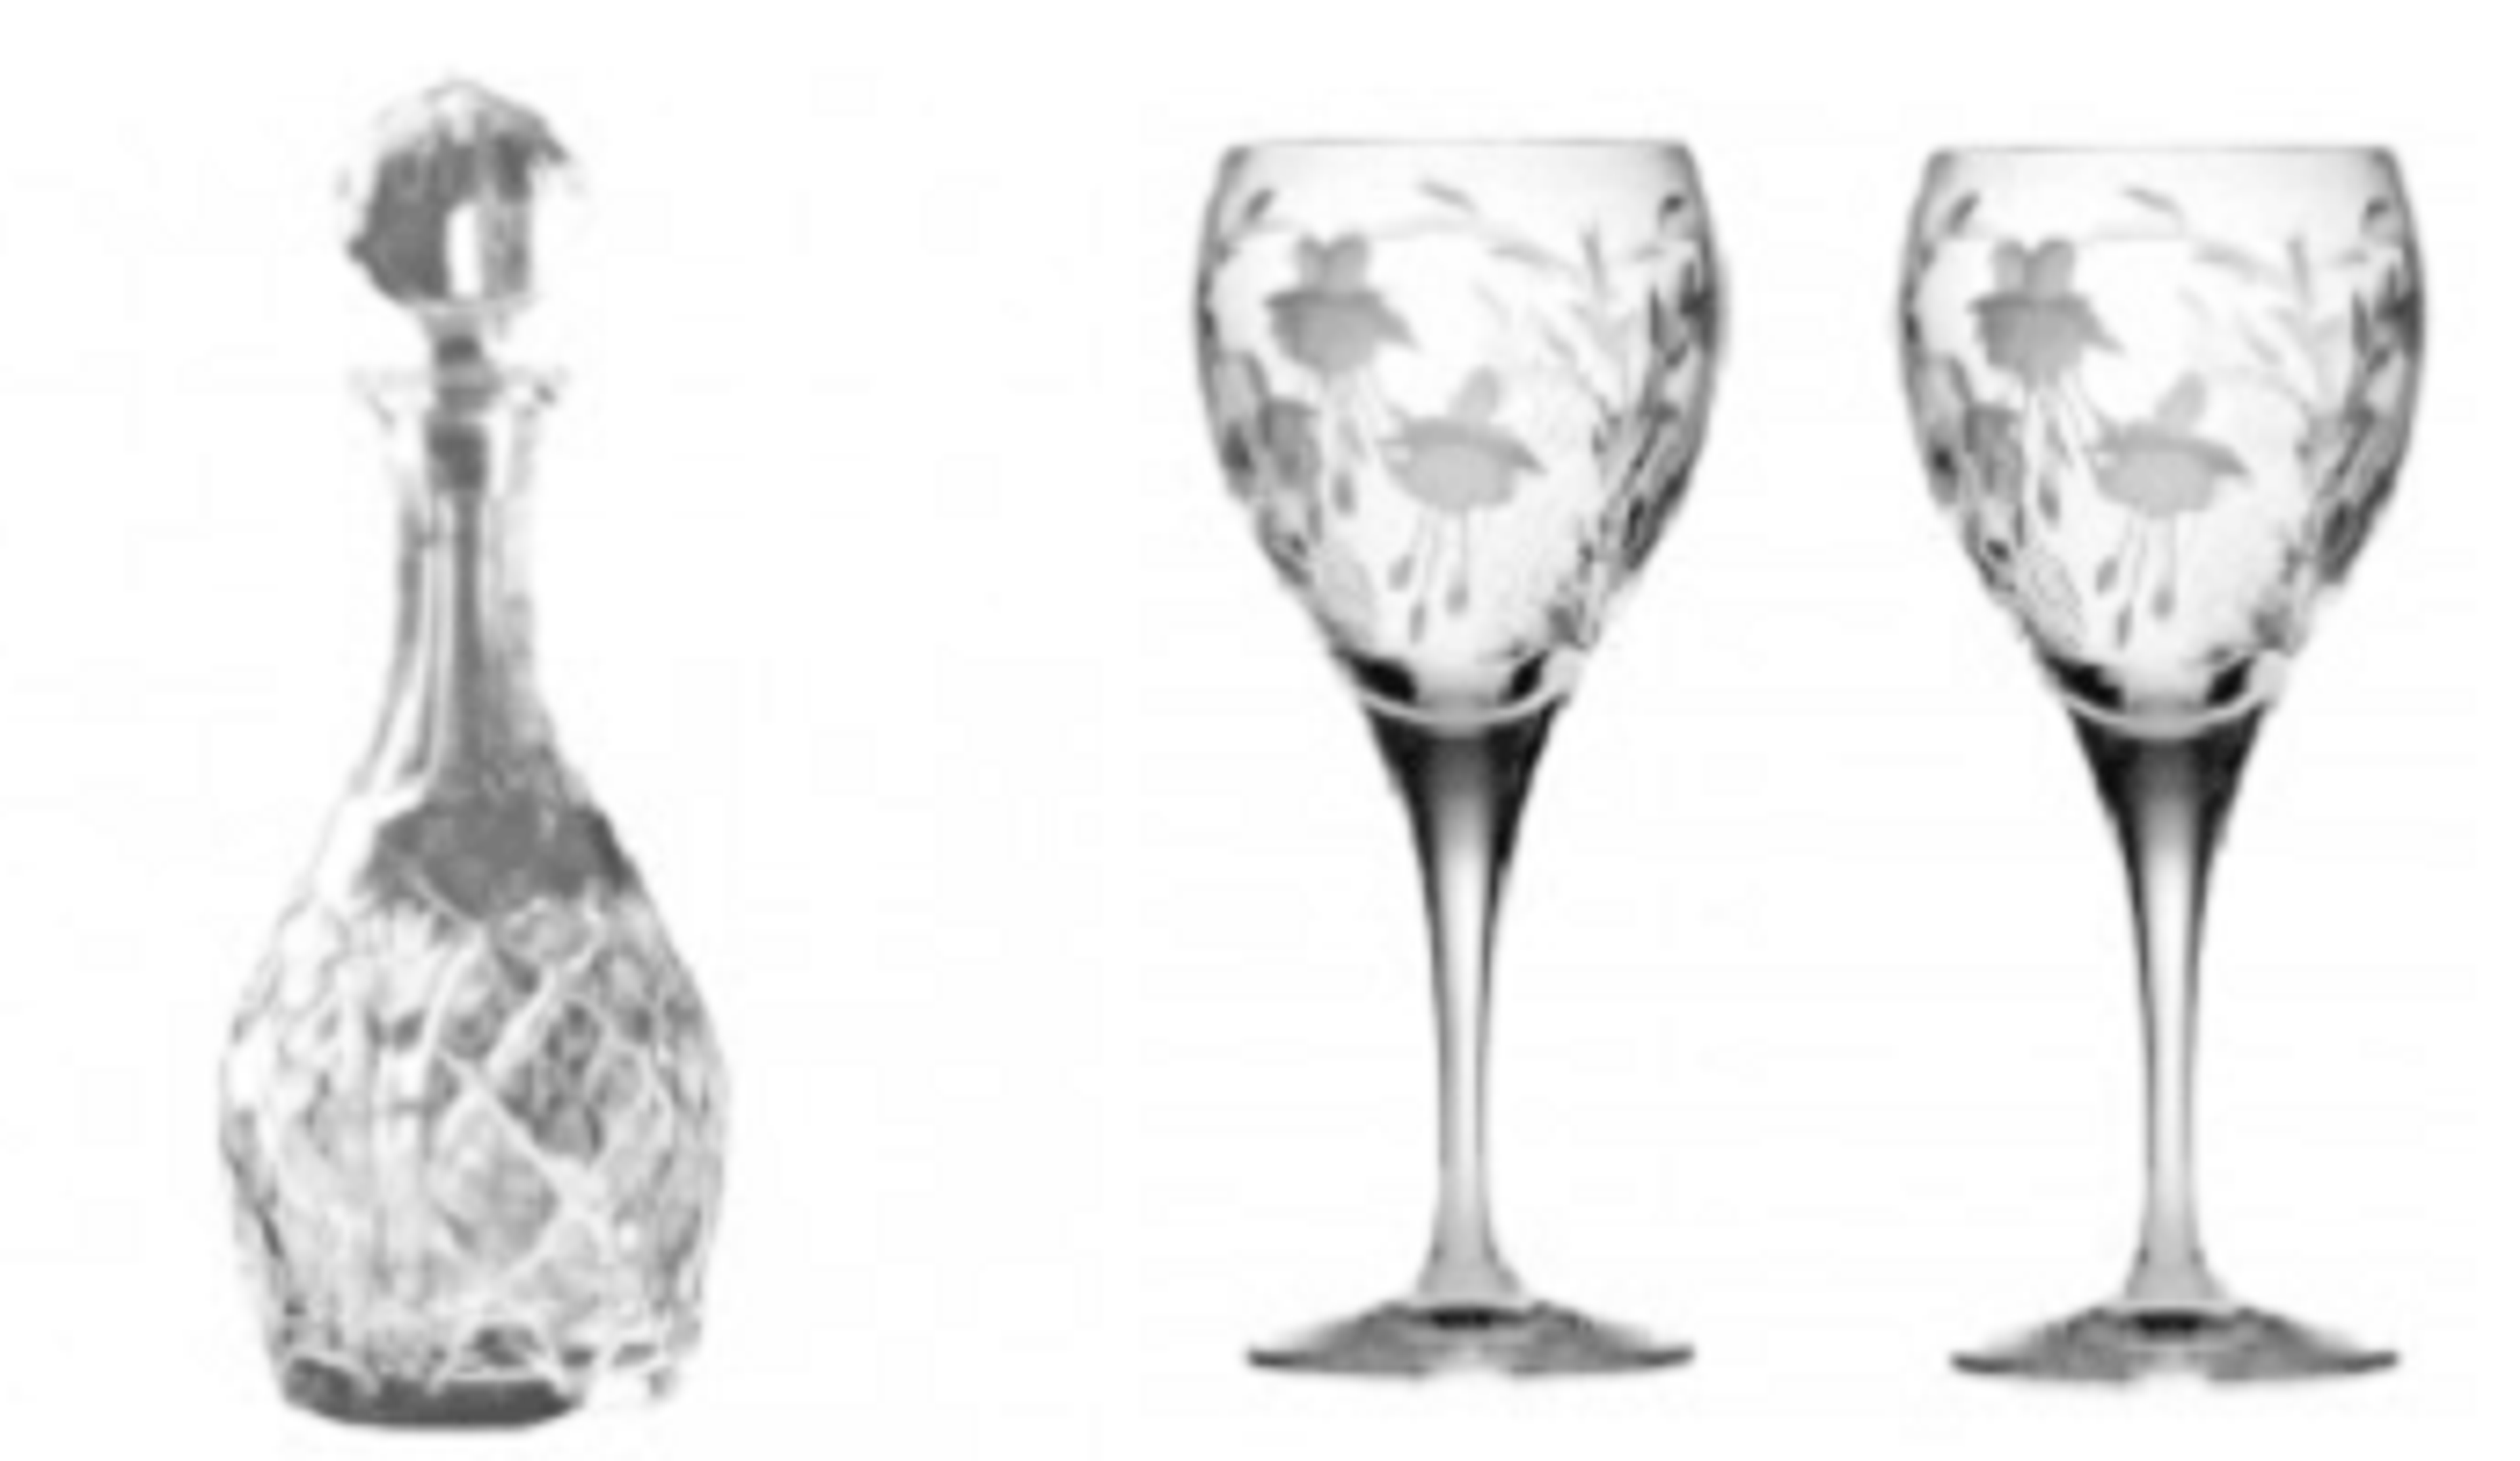  Havens crystal decanter and wine glasses 